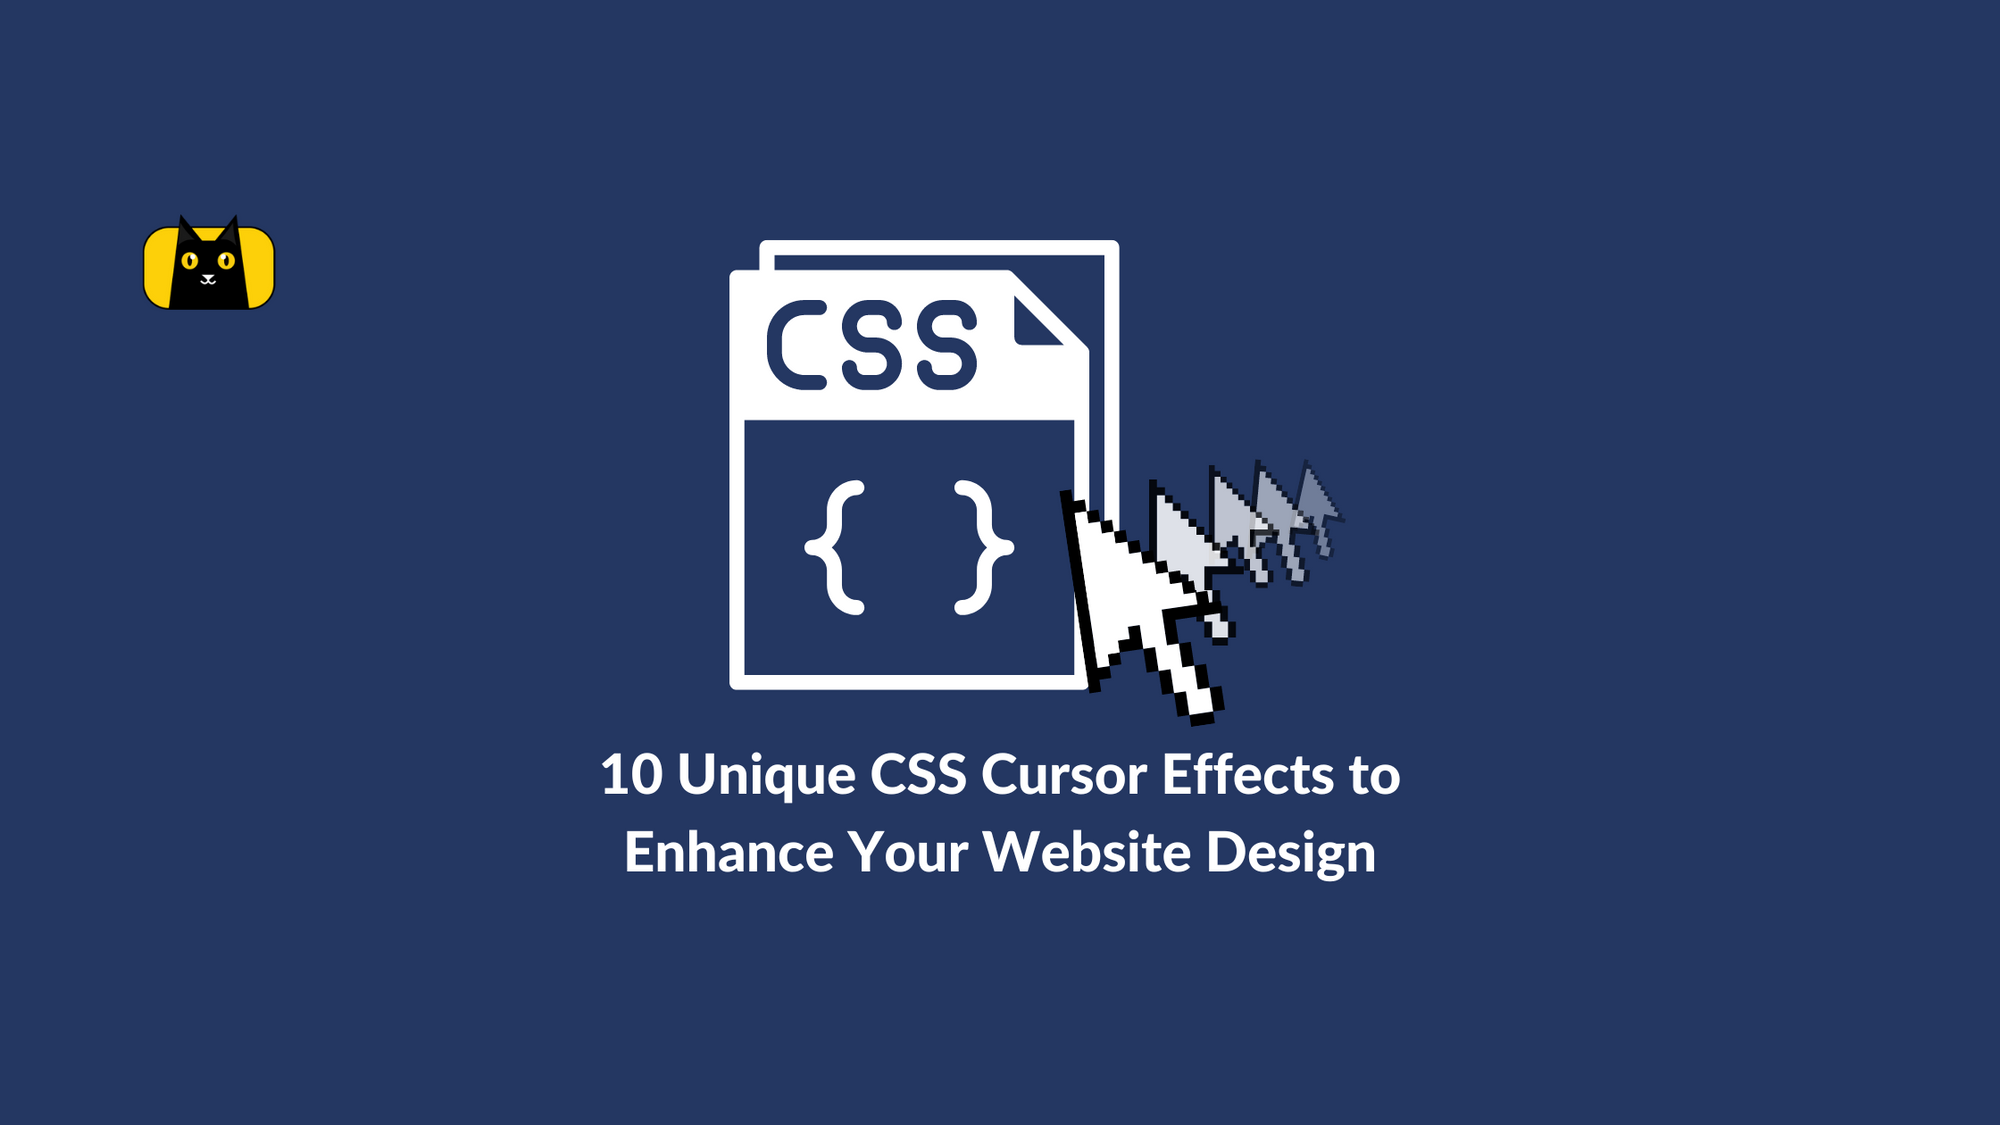 8 CSS & JavaScript Snippets For Creating Cool Cursor Effects